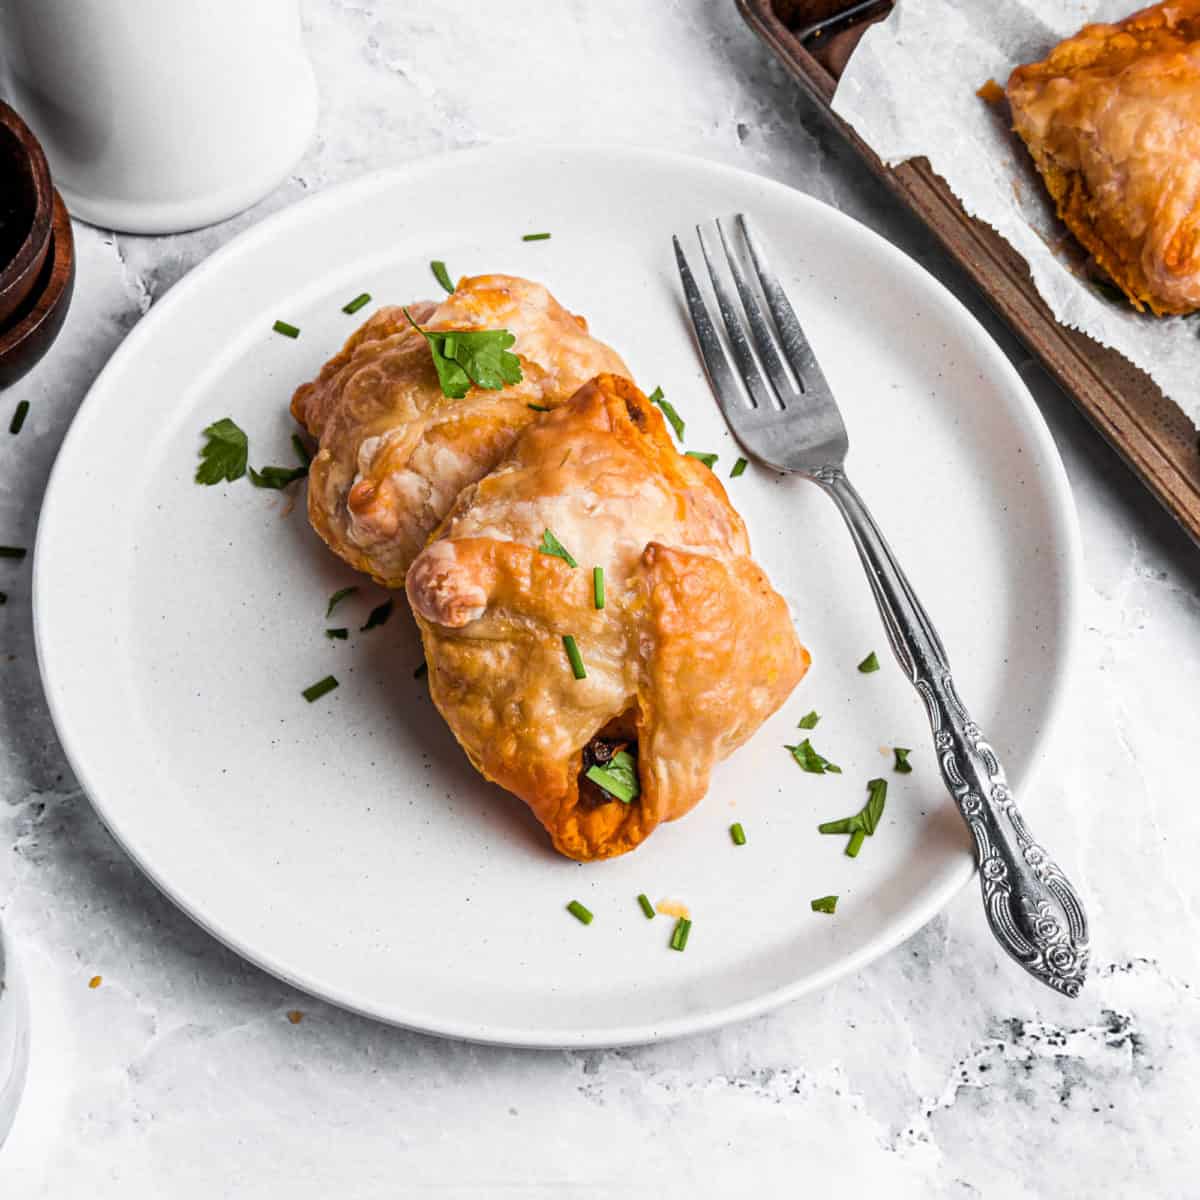 Two egg puffs on a plate with a fork.